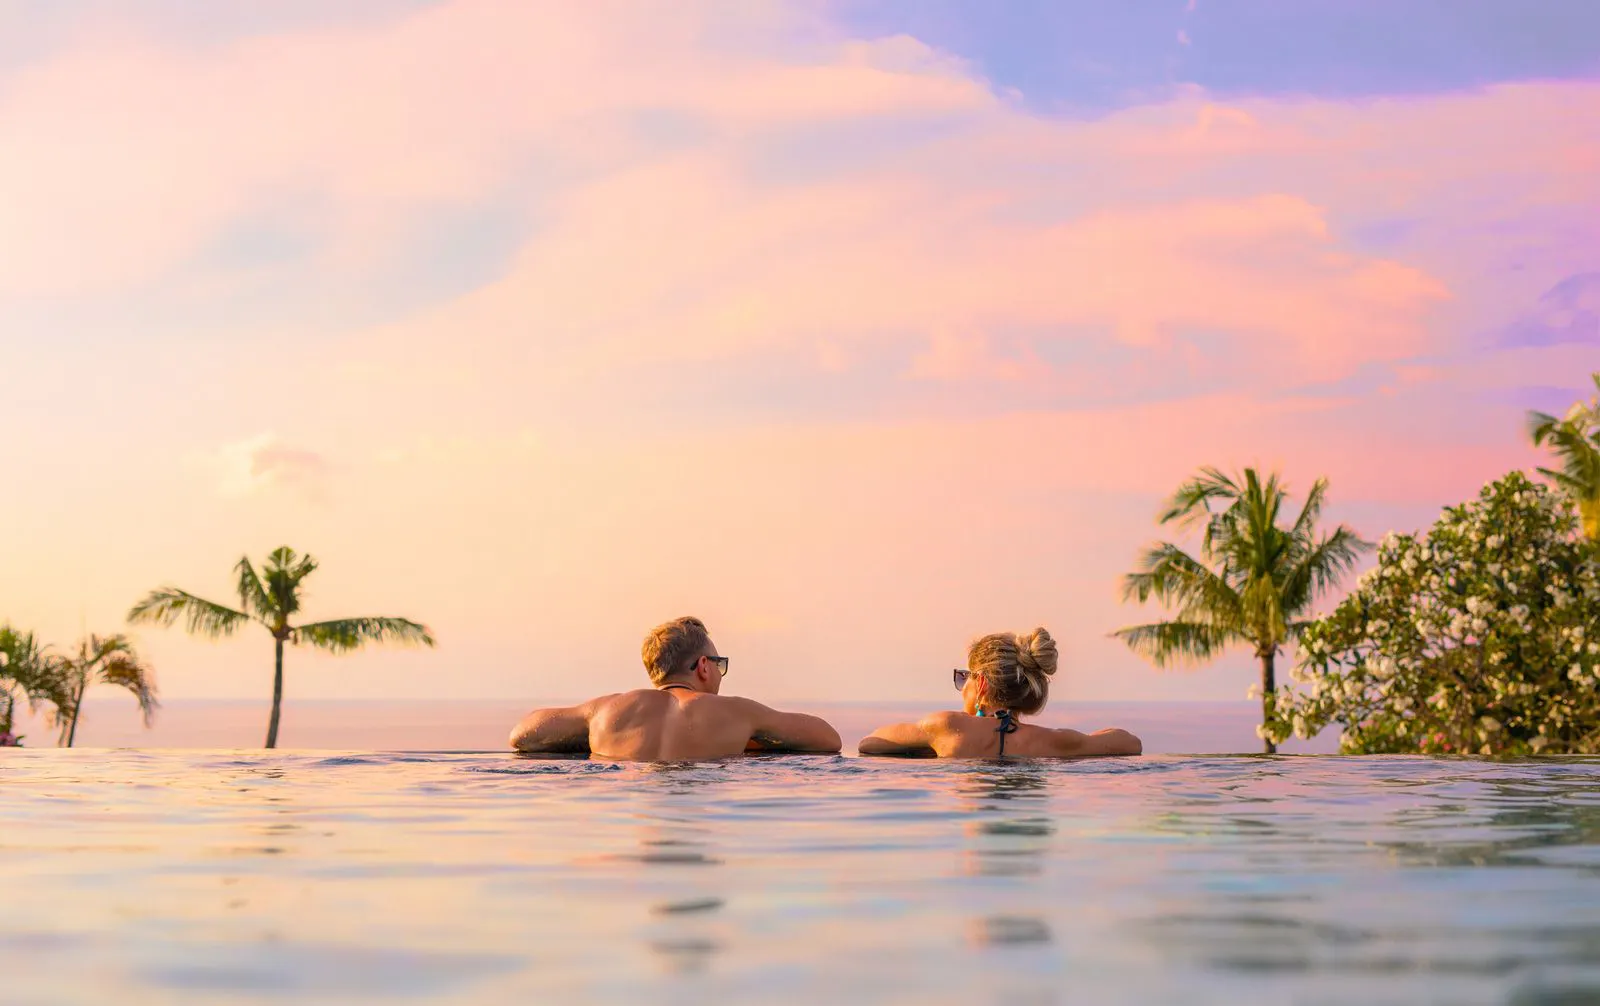 A couple at the edge of a pool watching a sunset over the sea